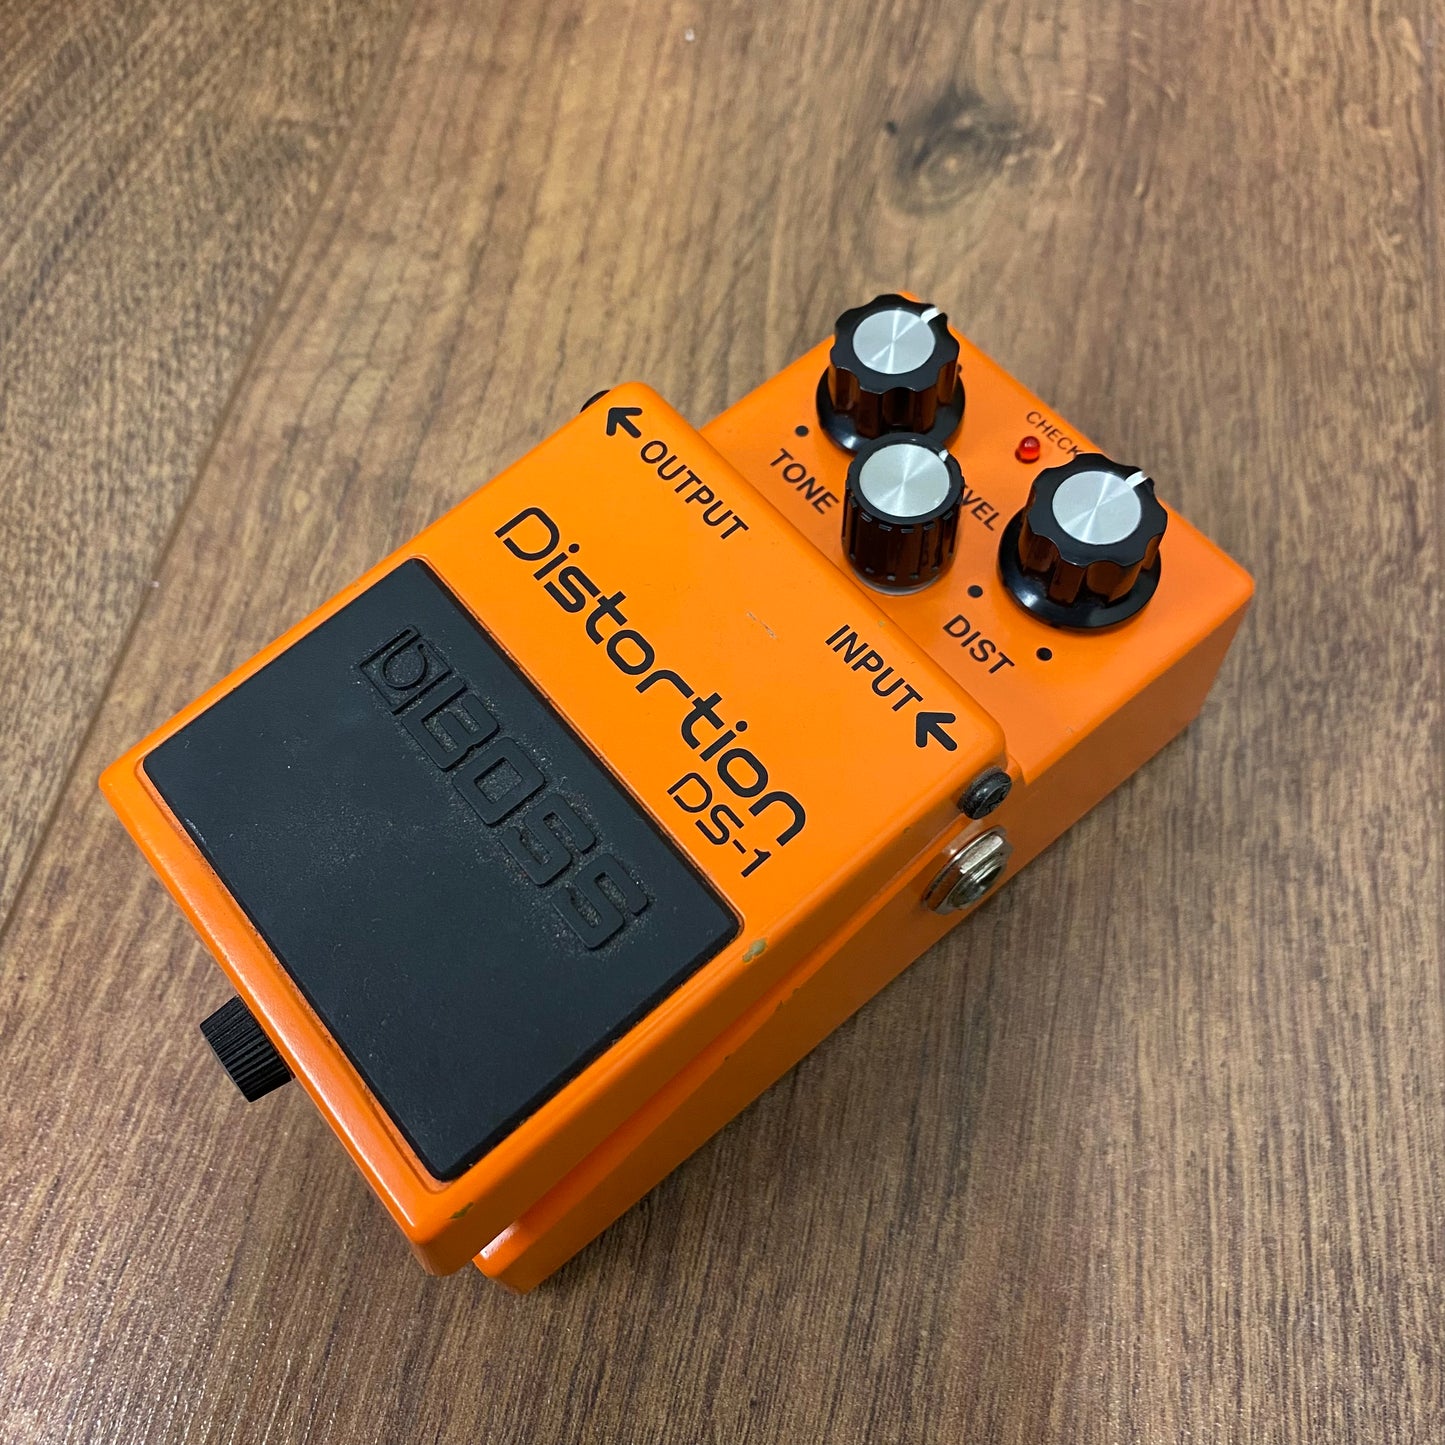 Pre-Owned Boss DS-1 Distortion Pedal